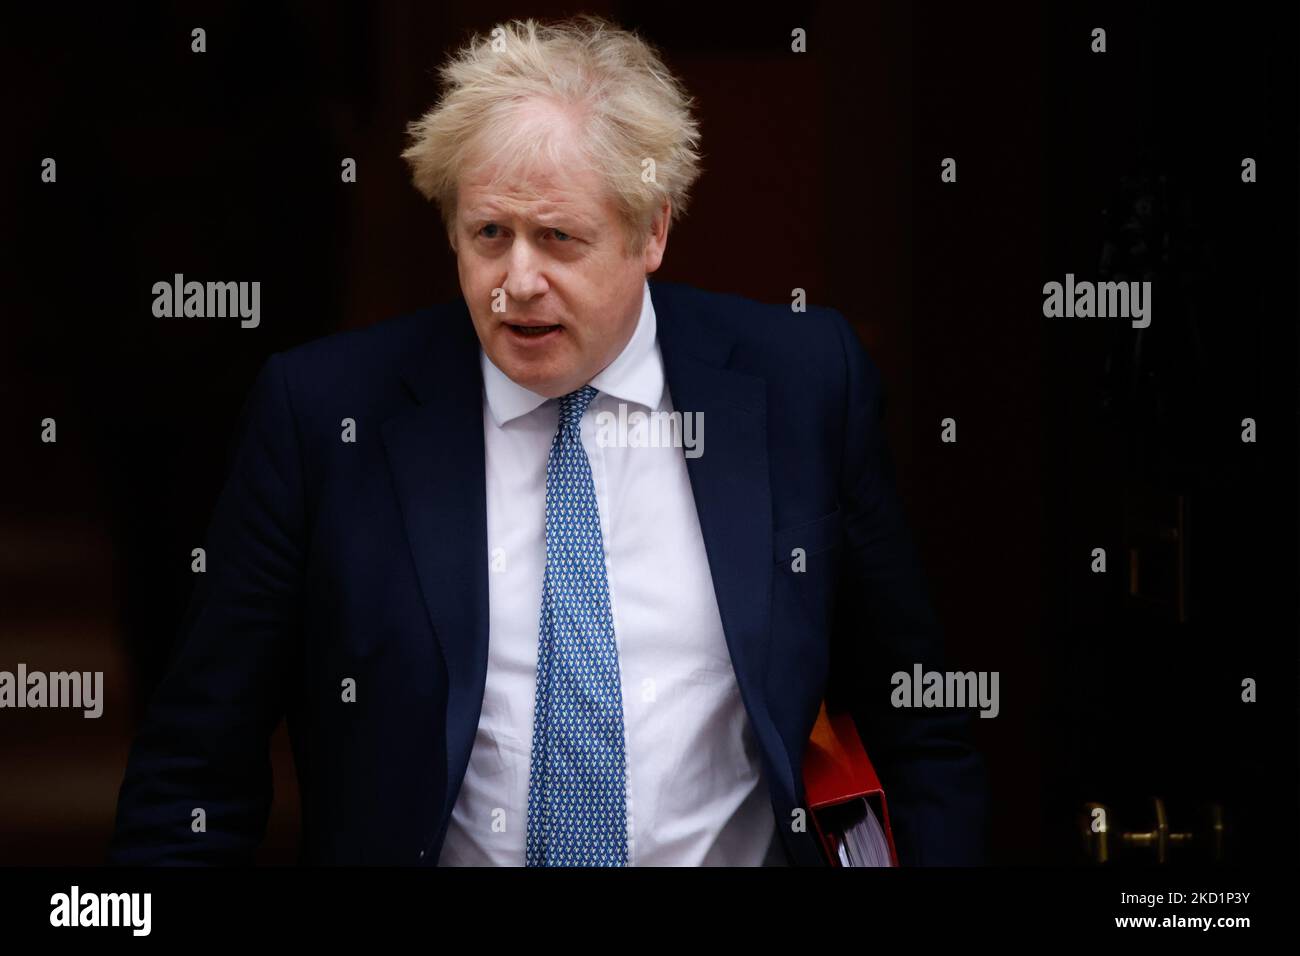 British Prime Minister Boris Johnson leaves 10 Downing Street for his weekly Prime Minister's Questions (PMQs) appearance in the House of Commons in London, England, on February 2, 2022. (Photo by David Cliff/NurPhoto) Stock Photo